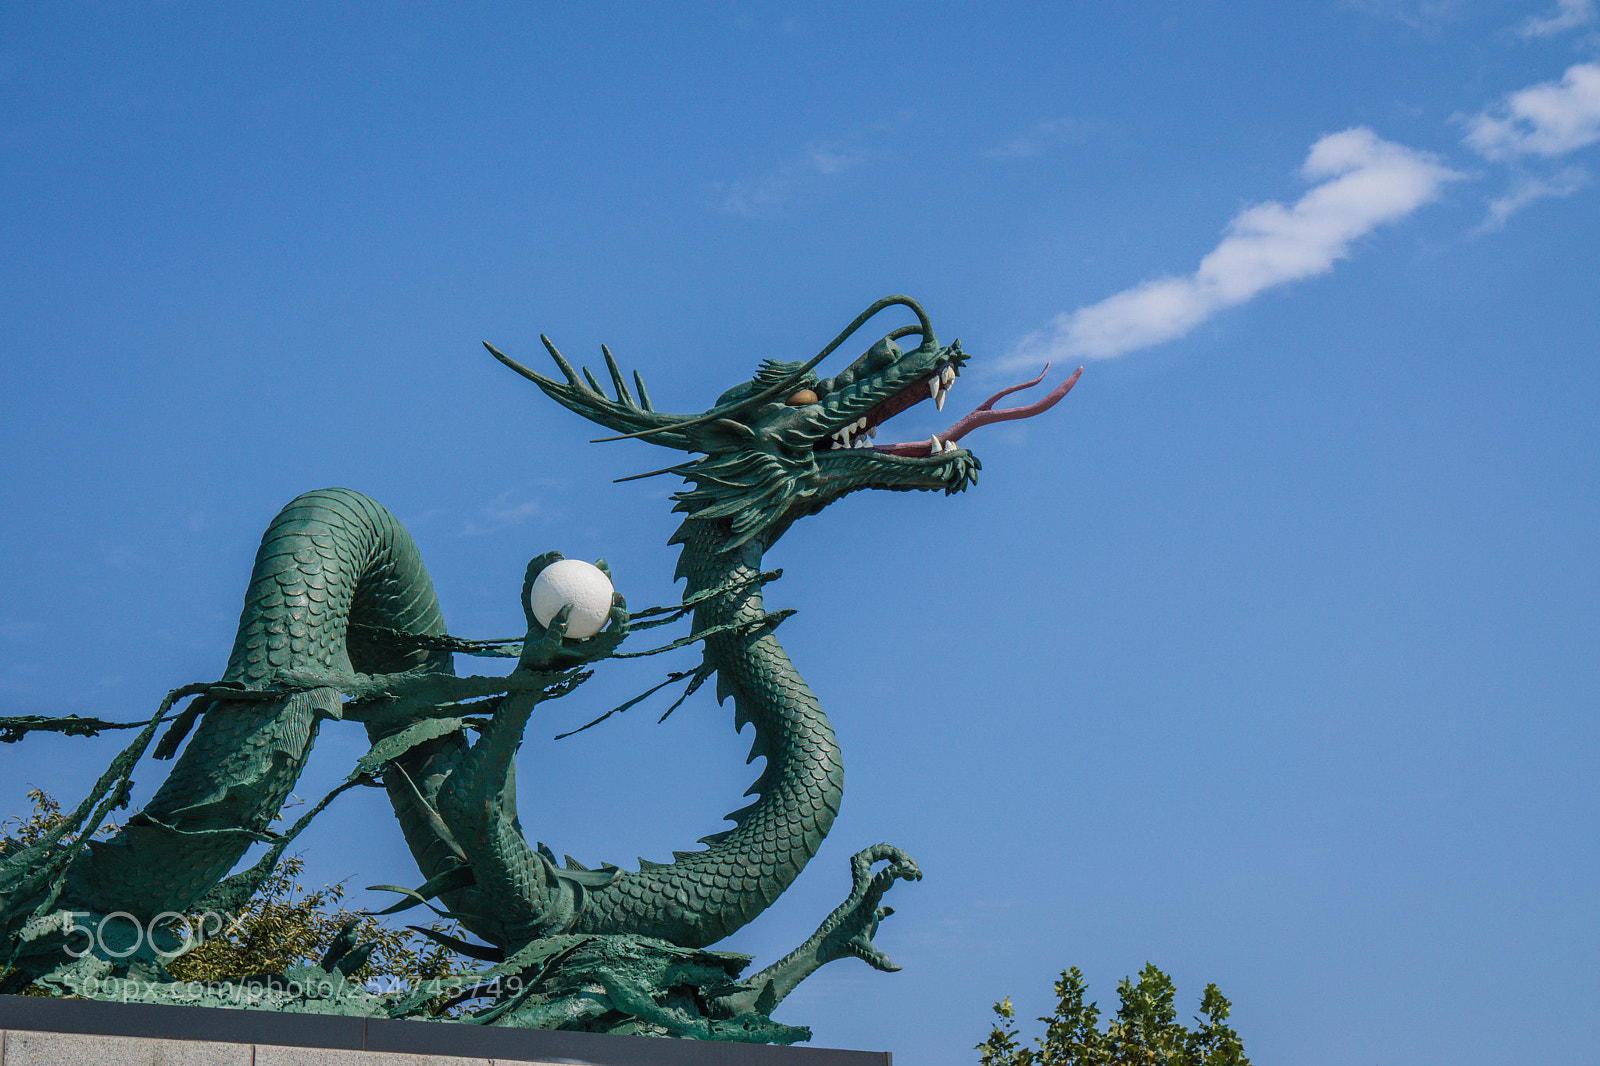 Sony a6000 sample photo. Cloud breathing dragon, busan photography